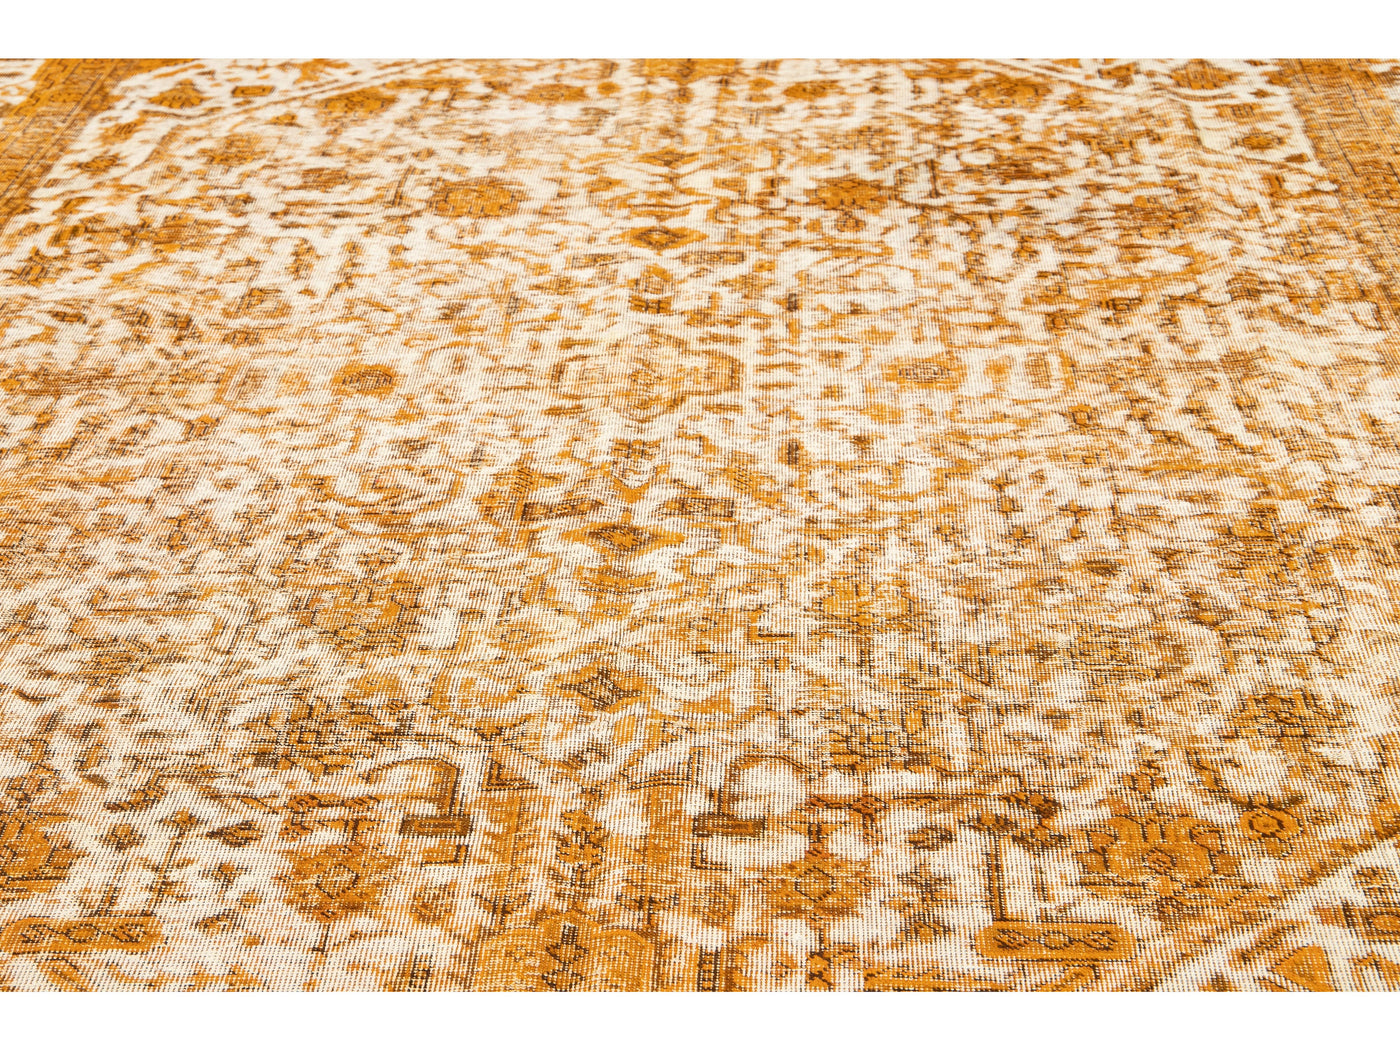 Antique Overdyed Wool Rug 10 x 13